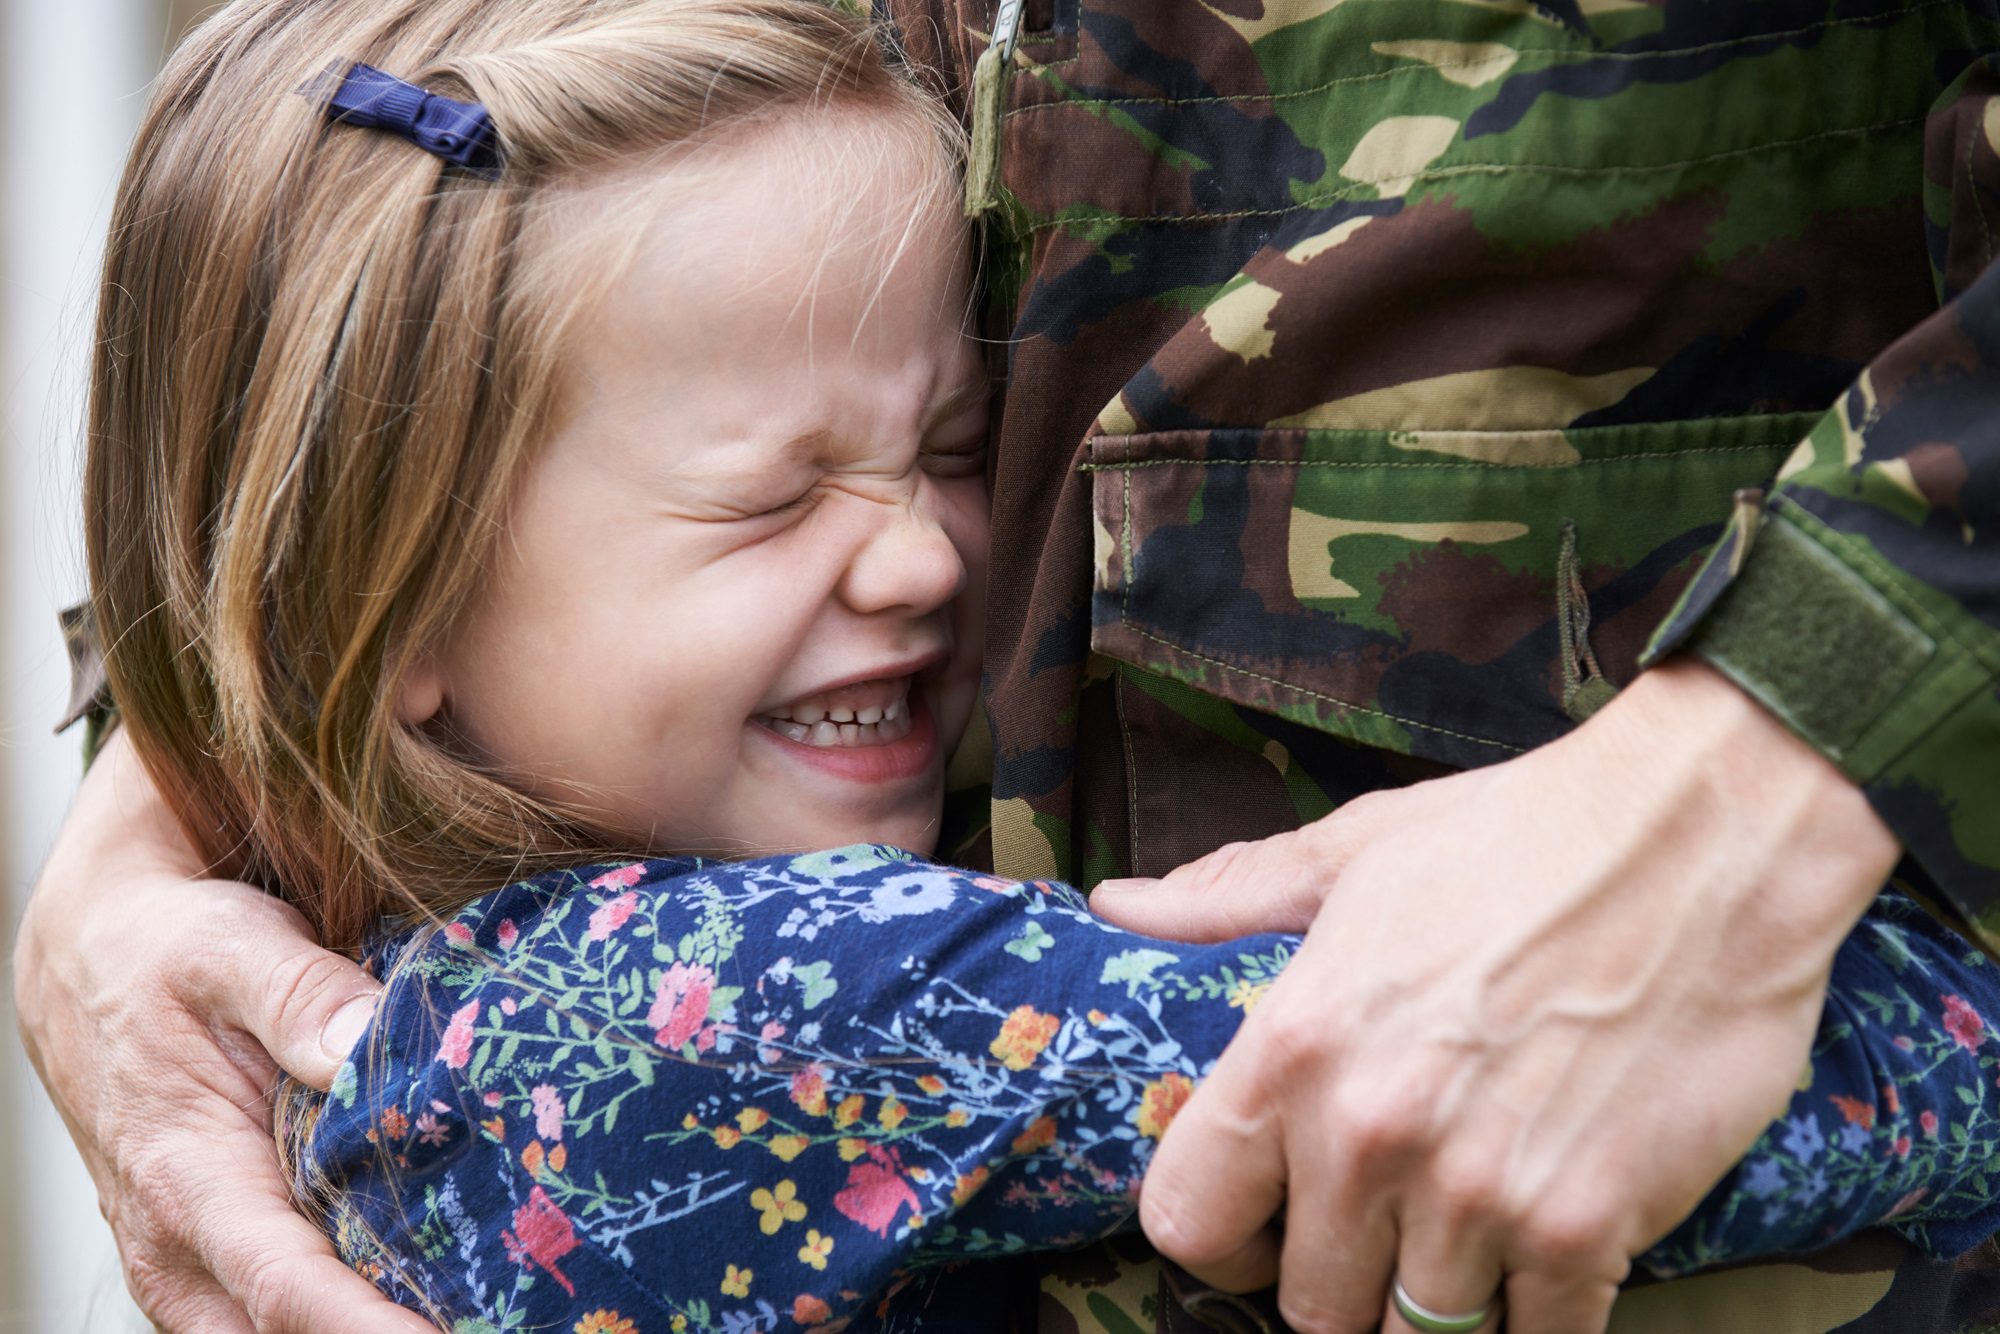 Frontline Families mental health service launched to support Suffolk armed forces community